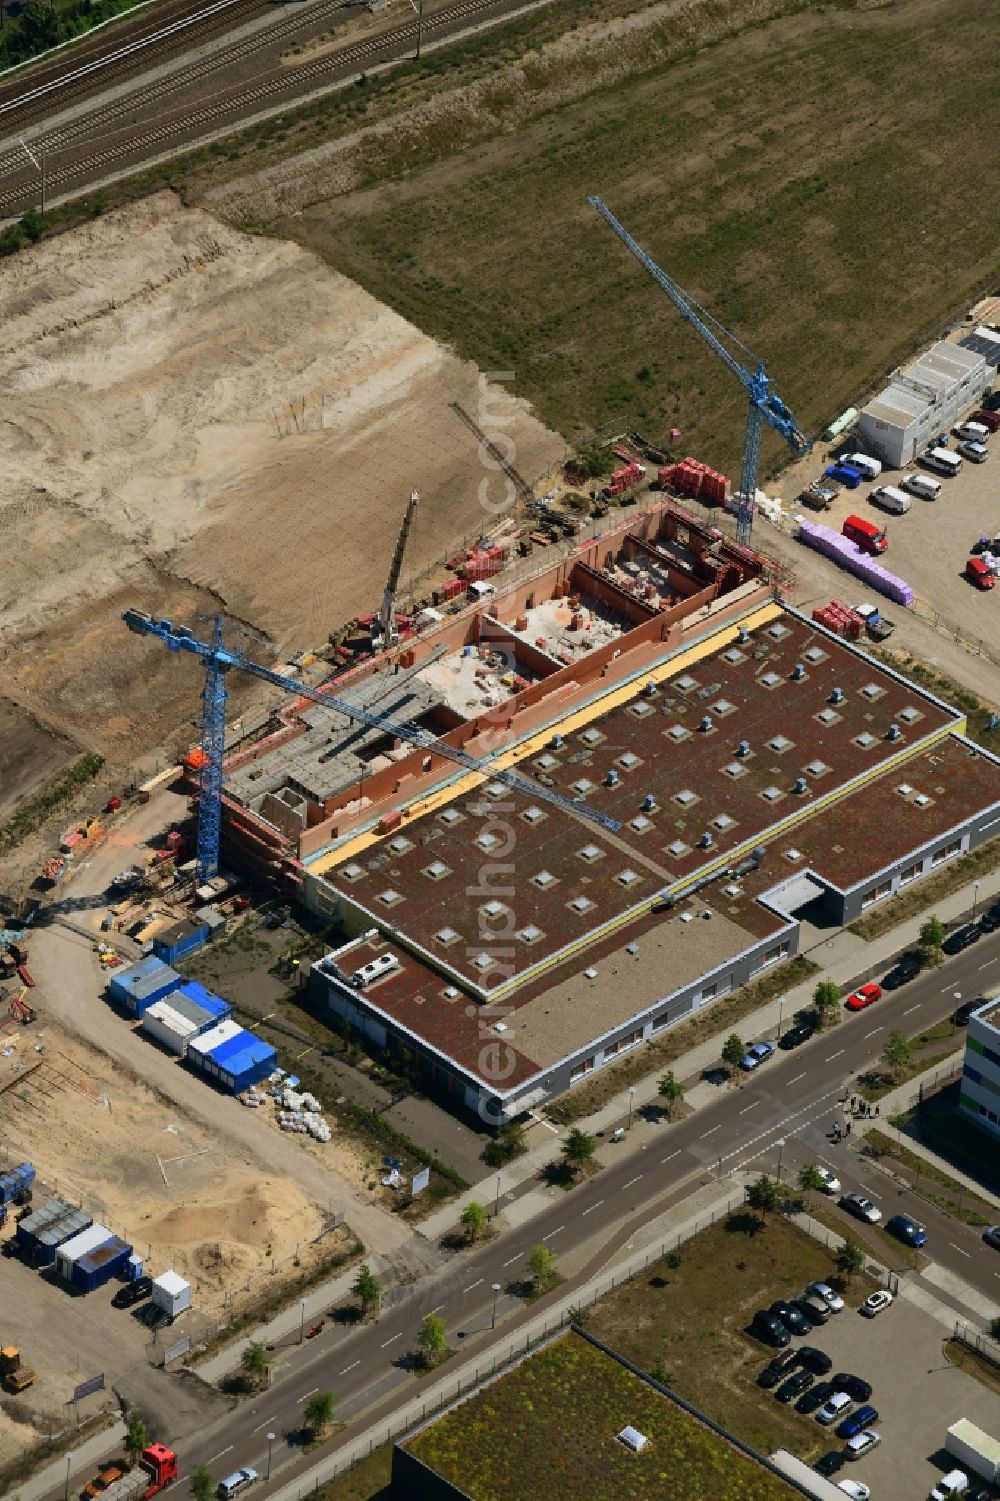 Aerial image Berlin - Construction site of the function and archive building UB-Magazin - Speicherbibliothek and Universitaetsarchiv on Wagner-Regeny-Strasse in the district Adlershof in Berlin, Germany